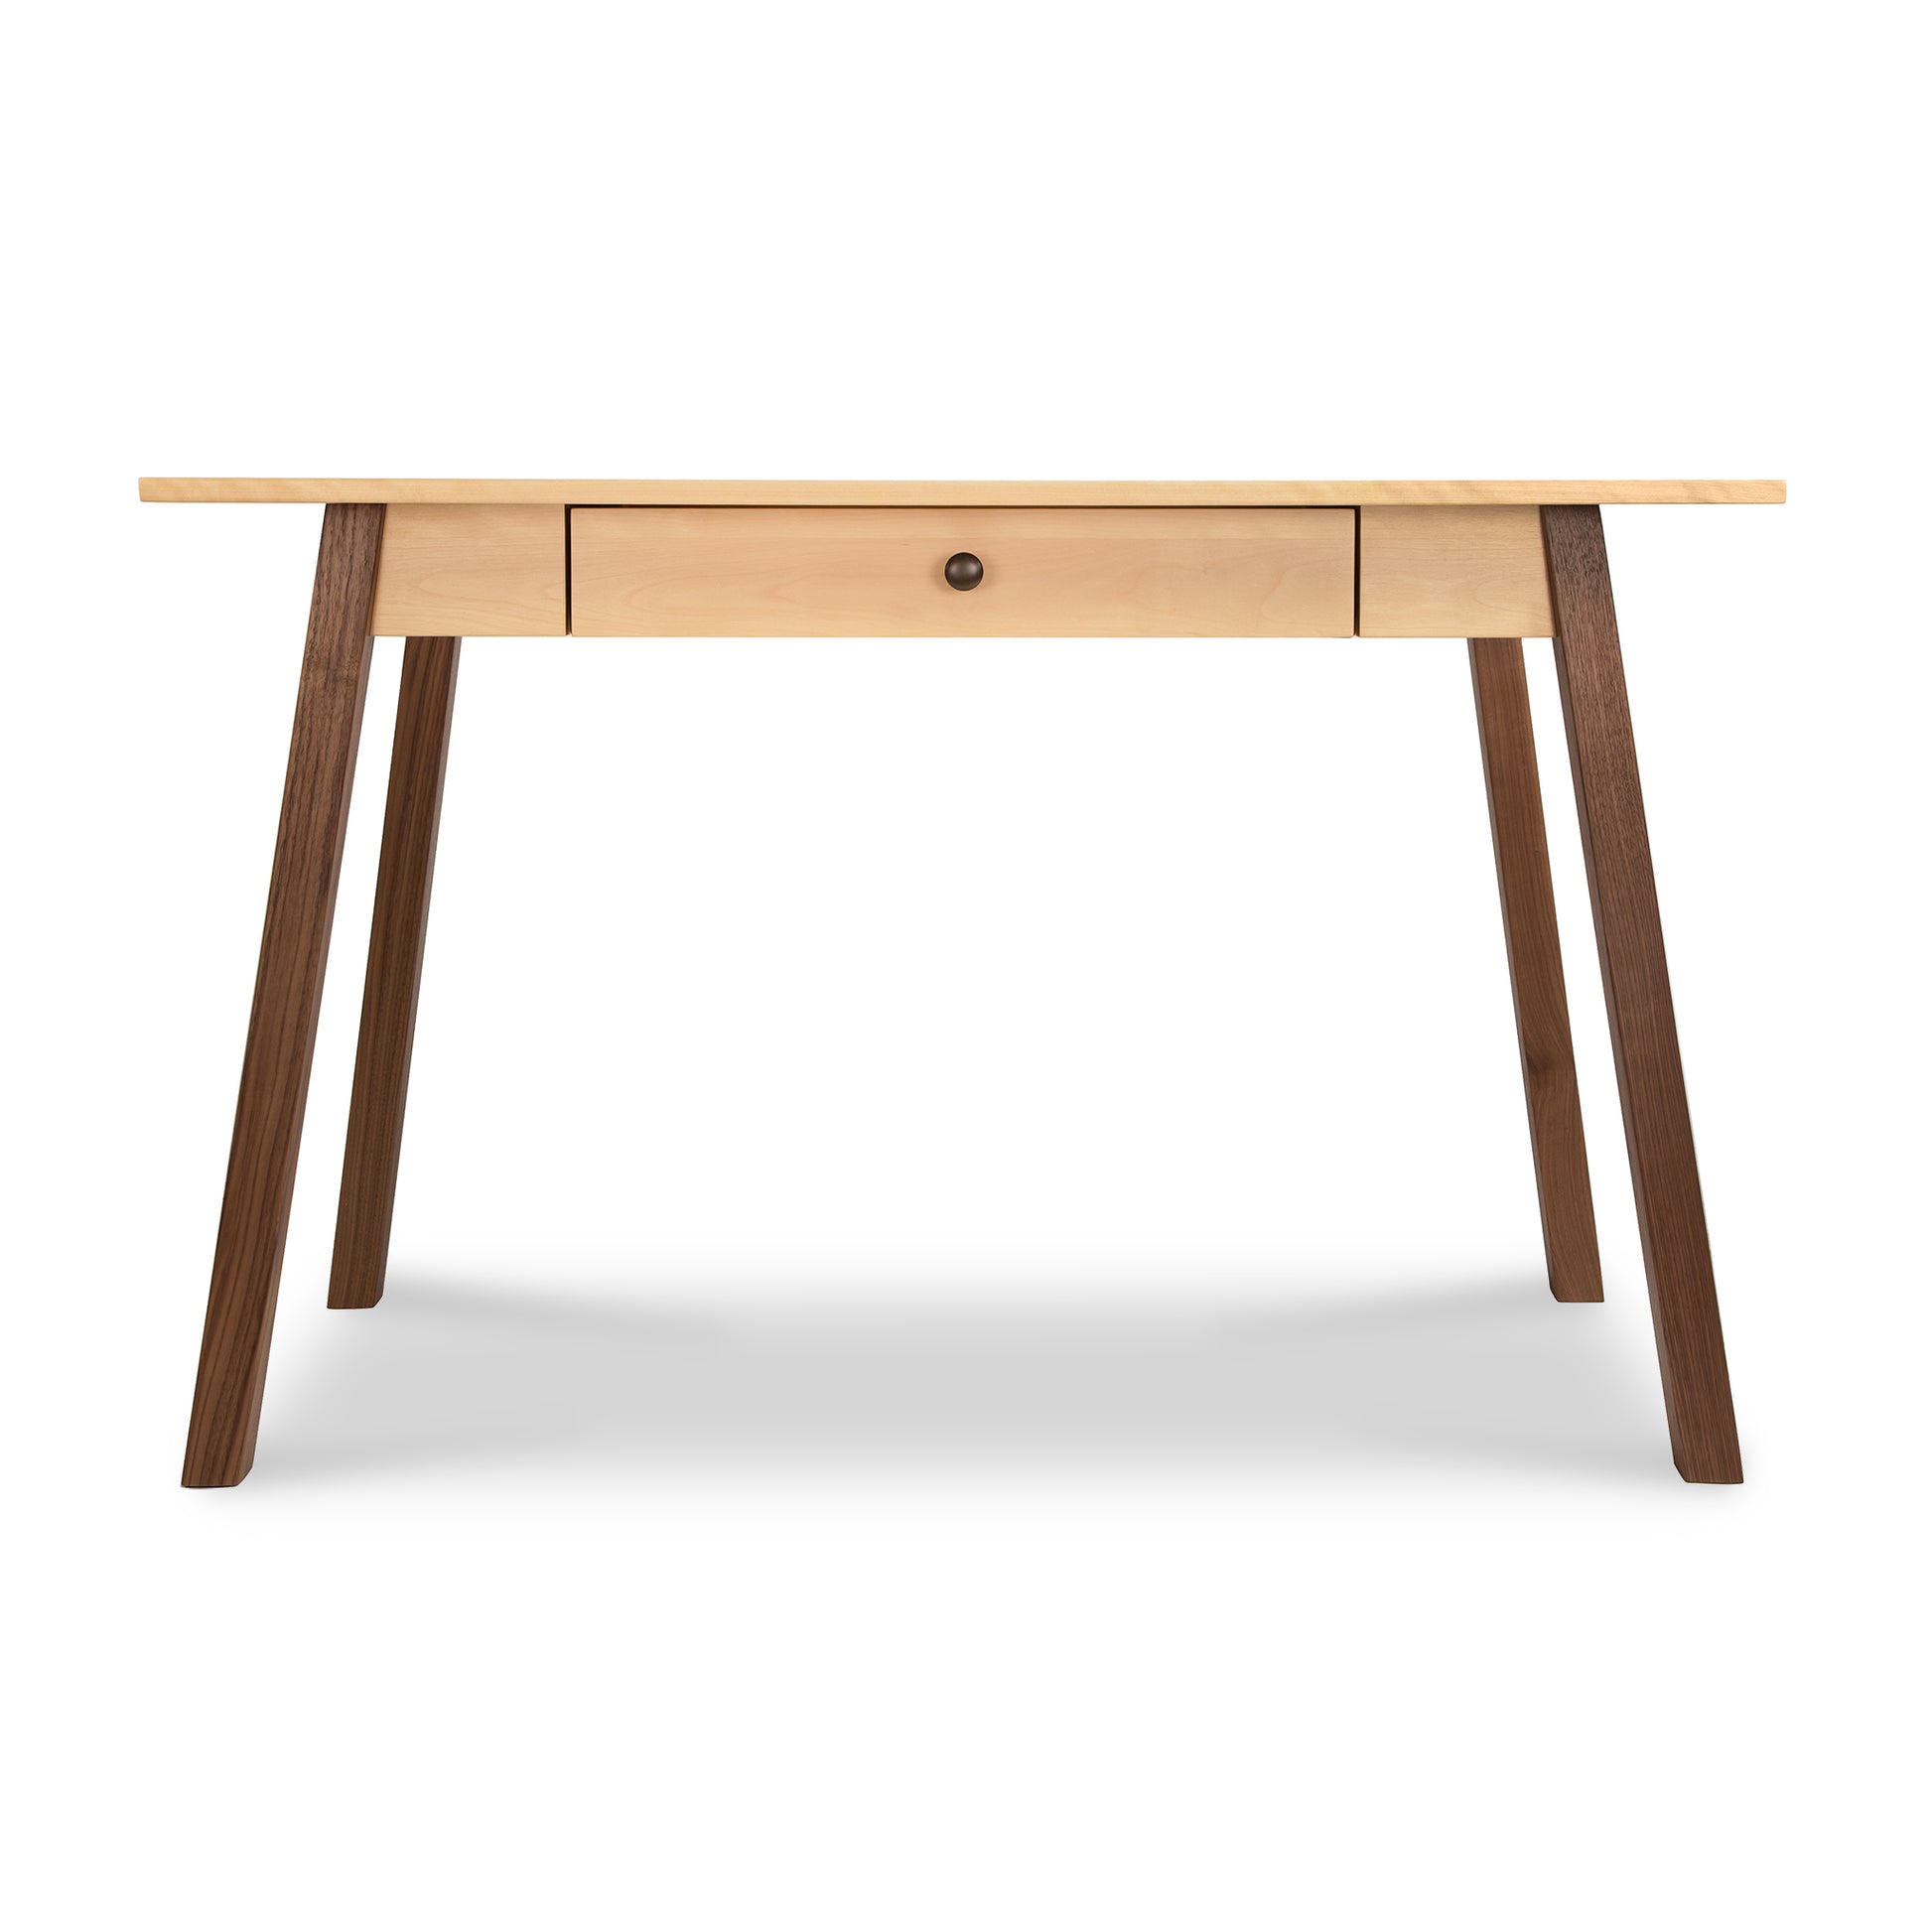 A modern wooden desk named the Vermont Woods Studios Manchester Two-Tone Writing Desk, featuring a single centered drawer, with a light wood tabletop and contrasting darker wood legs made from sustainable solid wood, isolated on a white background.